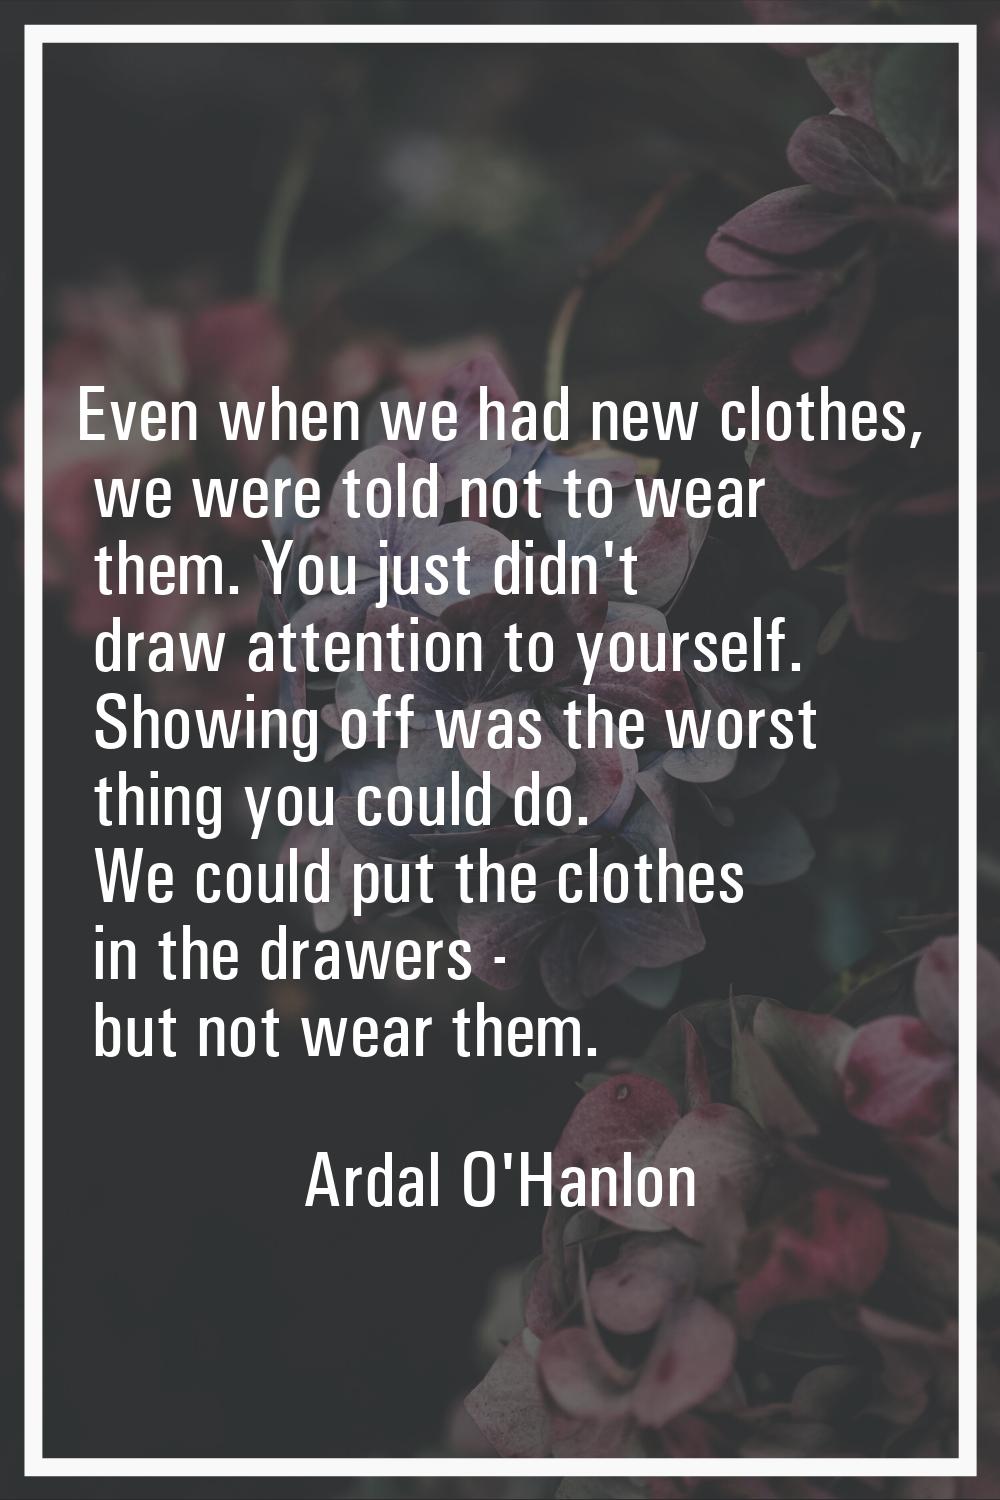 Even when we had new clothes, we were told not to wear them. You just didn't draw attention to your